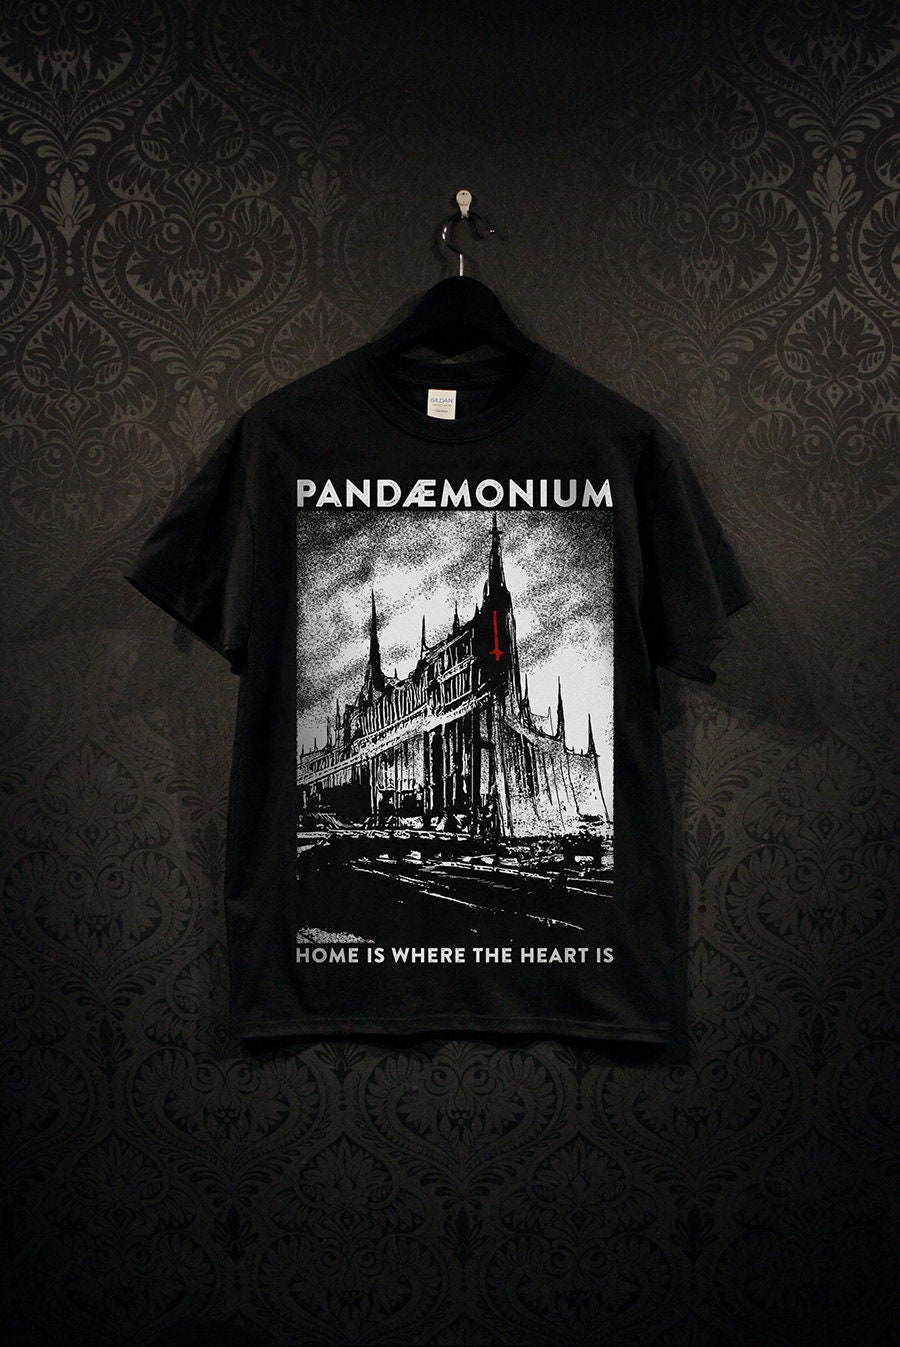 Pandemonium / Pandæmonium (Paradise Lost), home is where the heart is (Hell) - T-shirt